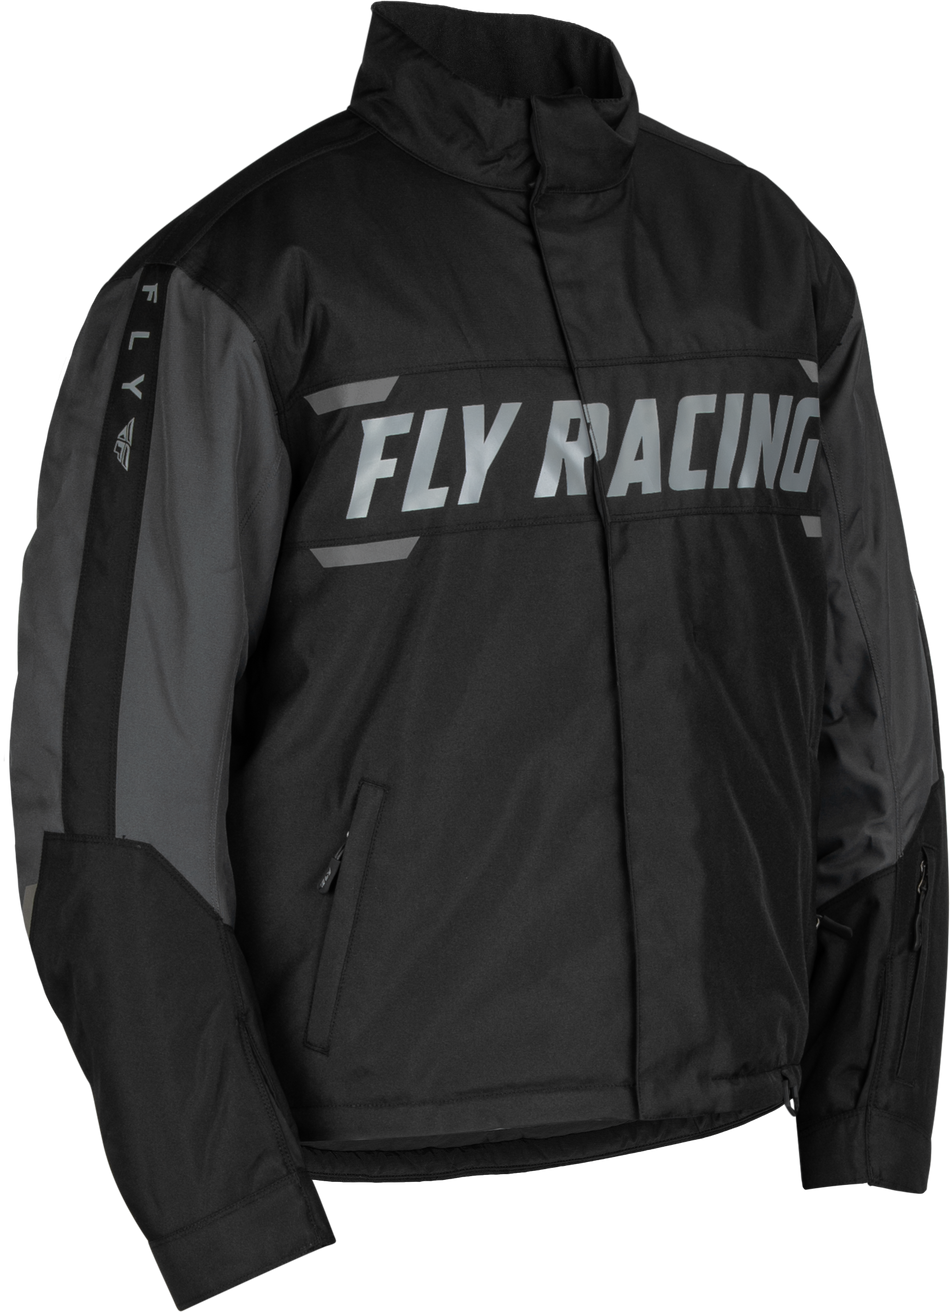 FLY RACING Outpost Jacket Black/Grey Sm 470-5500S